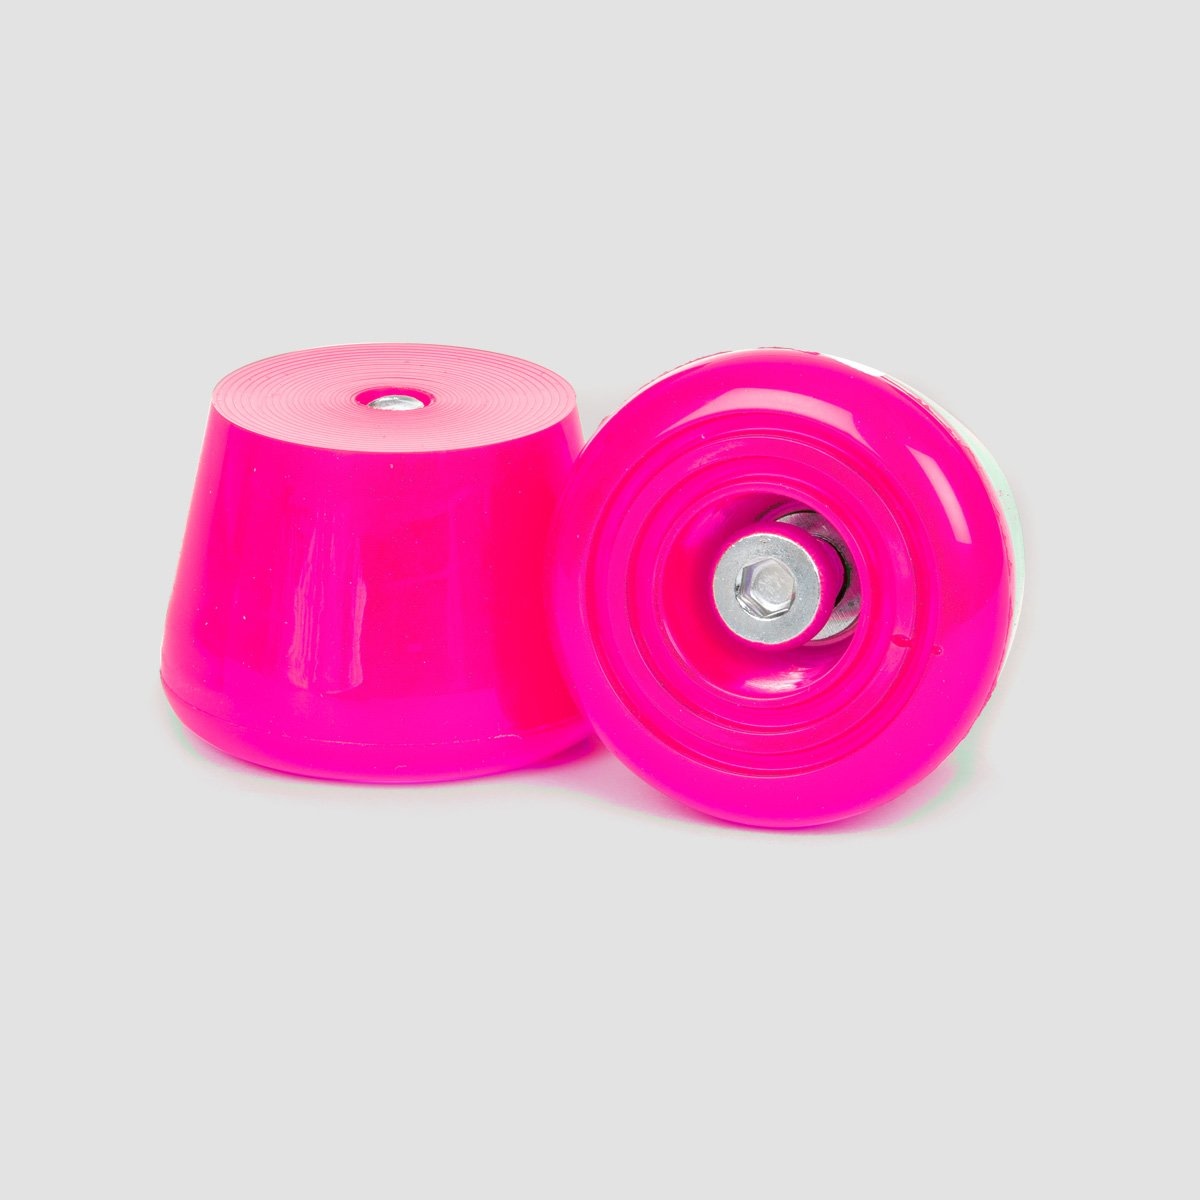 Rio Roller Toe Stoppers x2 Pink - Skates